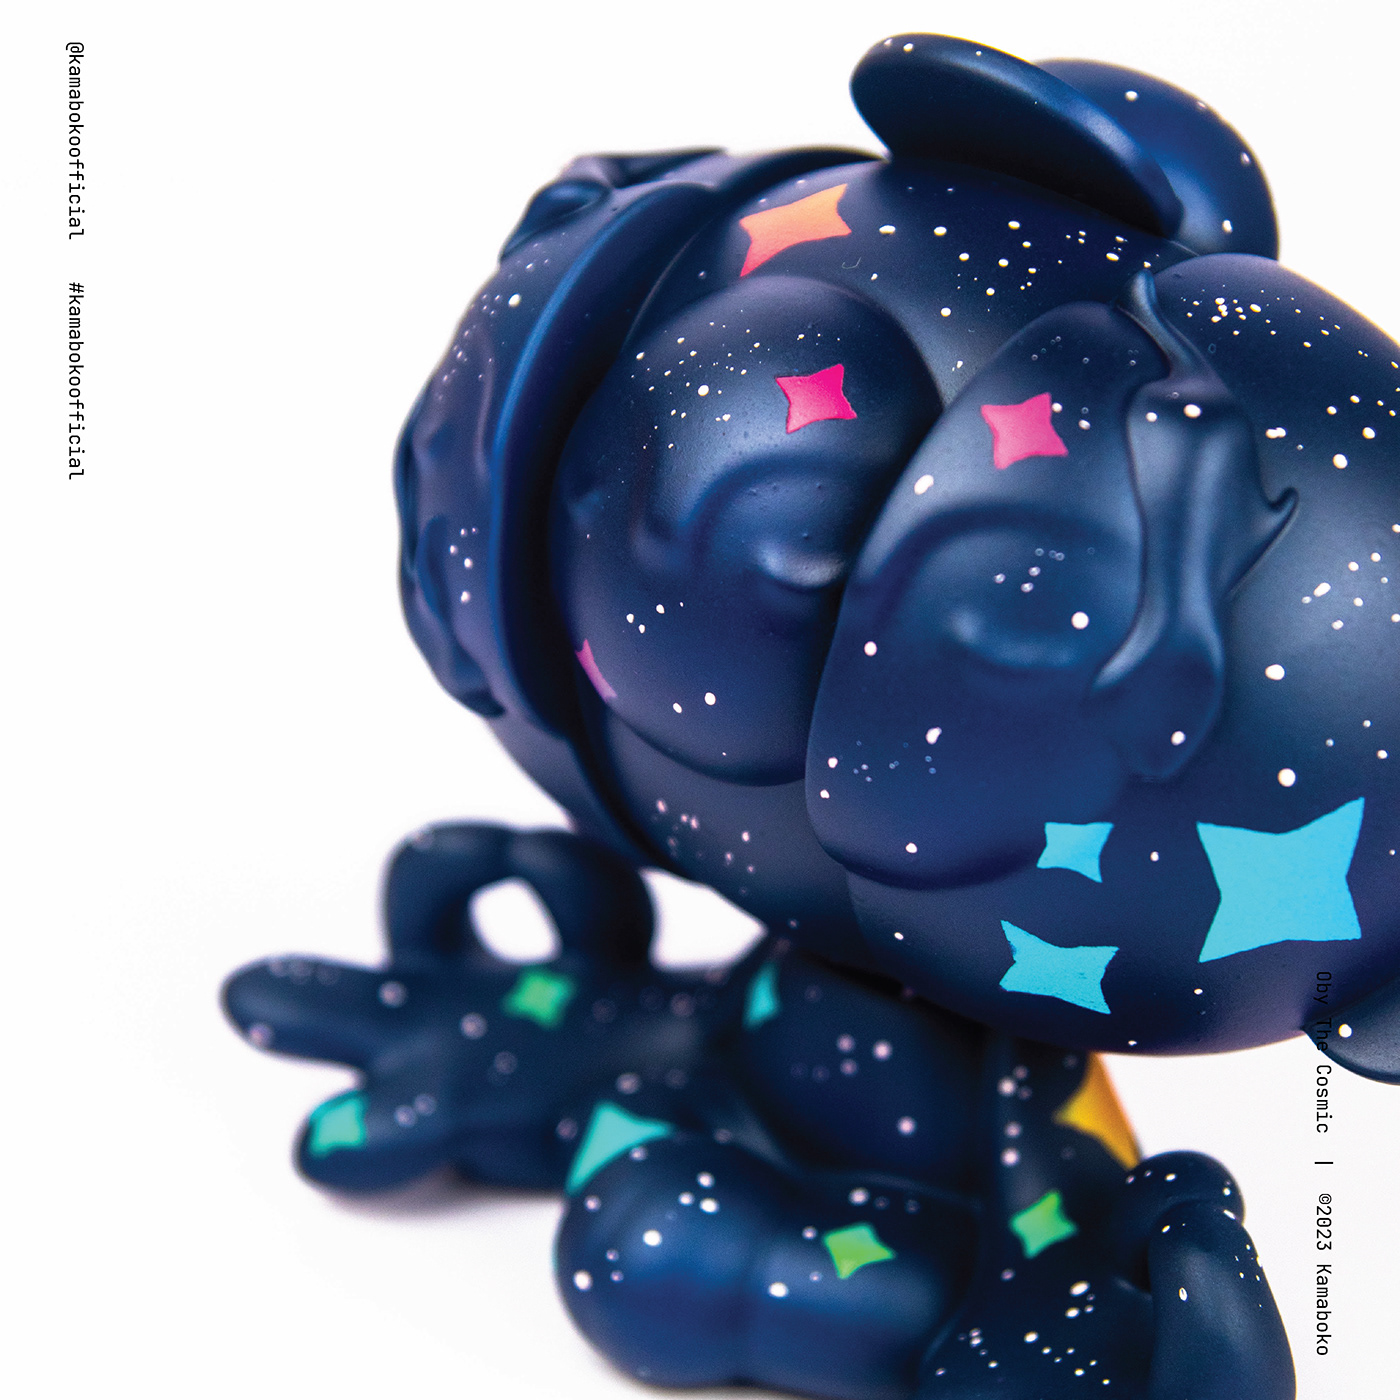 toys toy design  sculpture airbrush galaxy universe stars cosmos oby